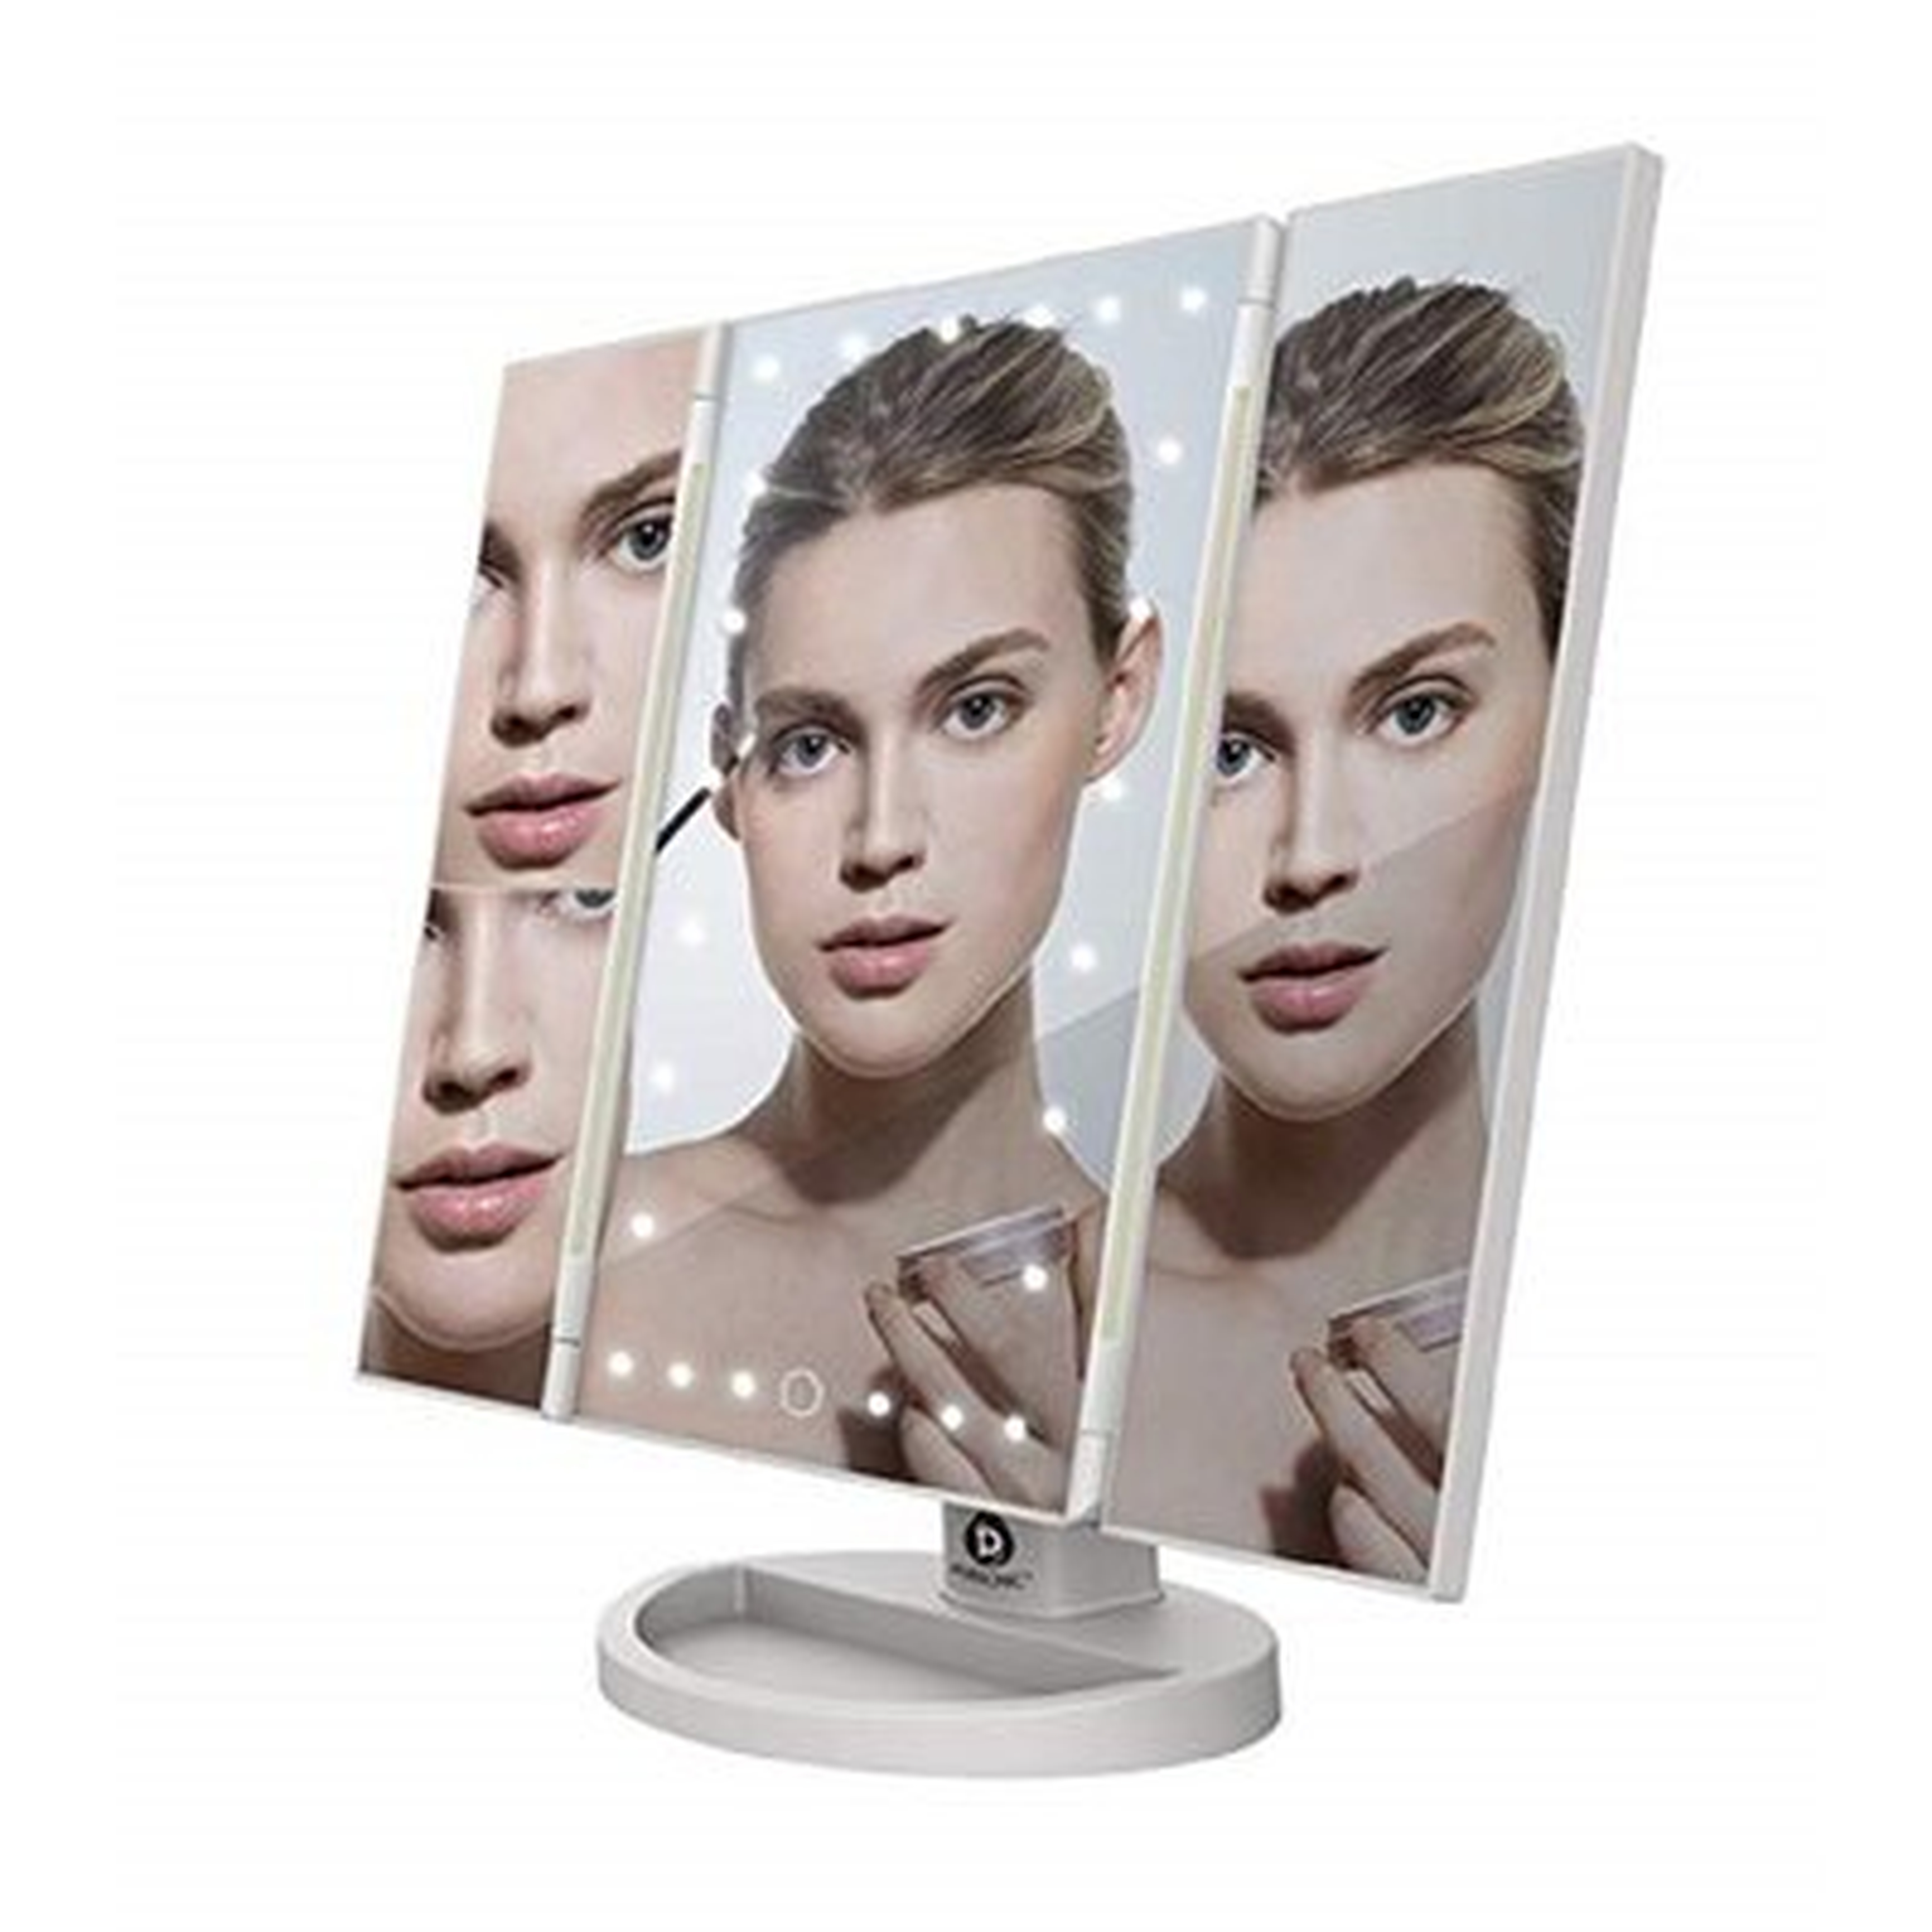 Virgil Led Tri Fold Vanity Mirror 2x and 3x Magnifications - 24 Dimmable Natural Lights, Touch Screen Adjustable Countertop Table Mirror with Cosmetic Stand - Wayfair